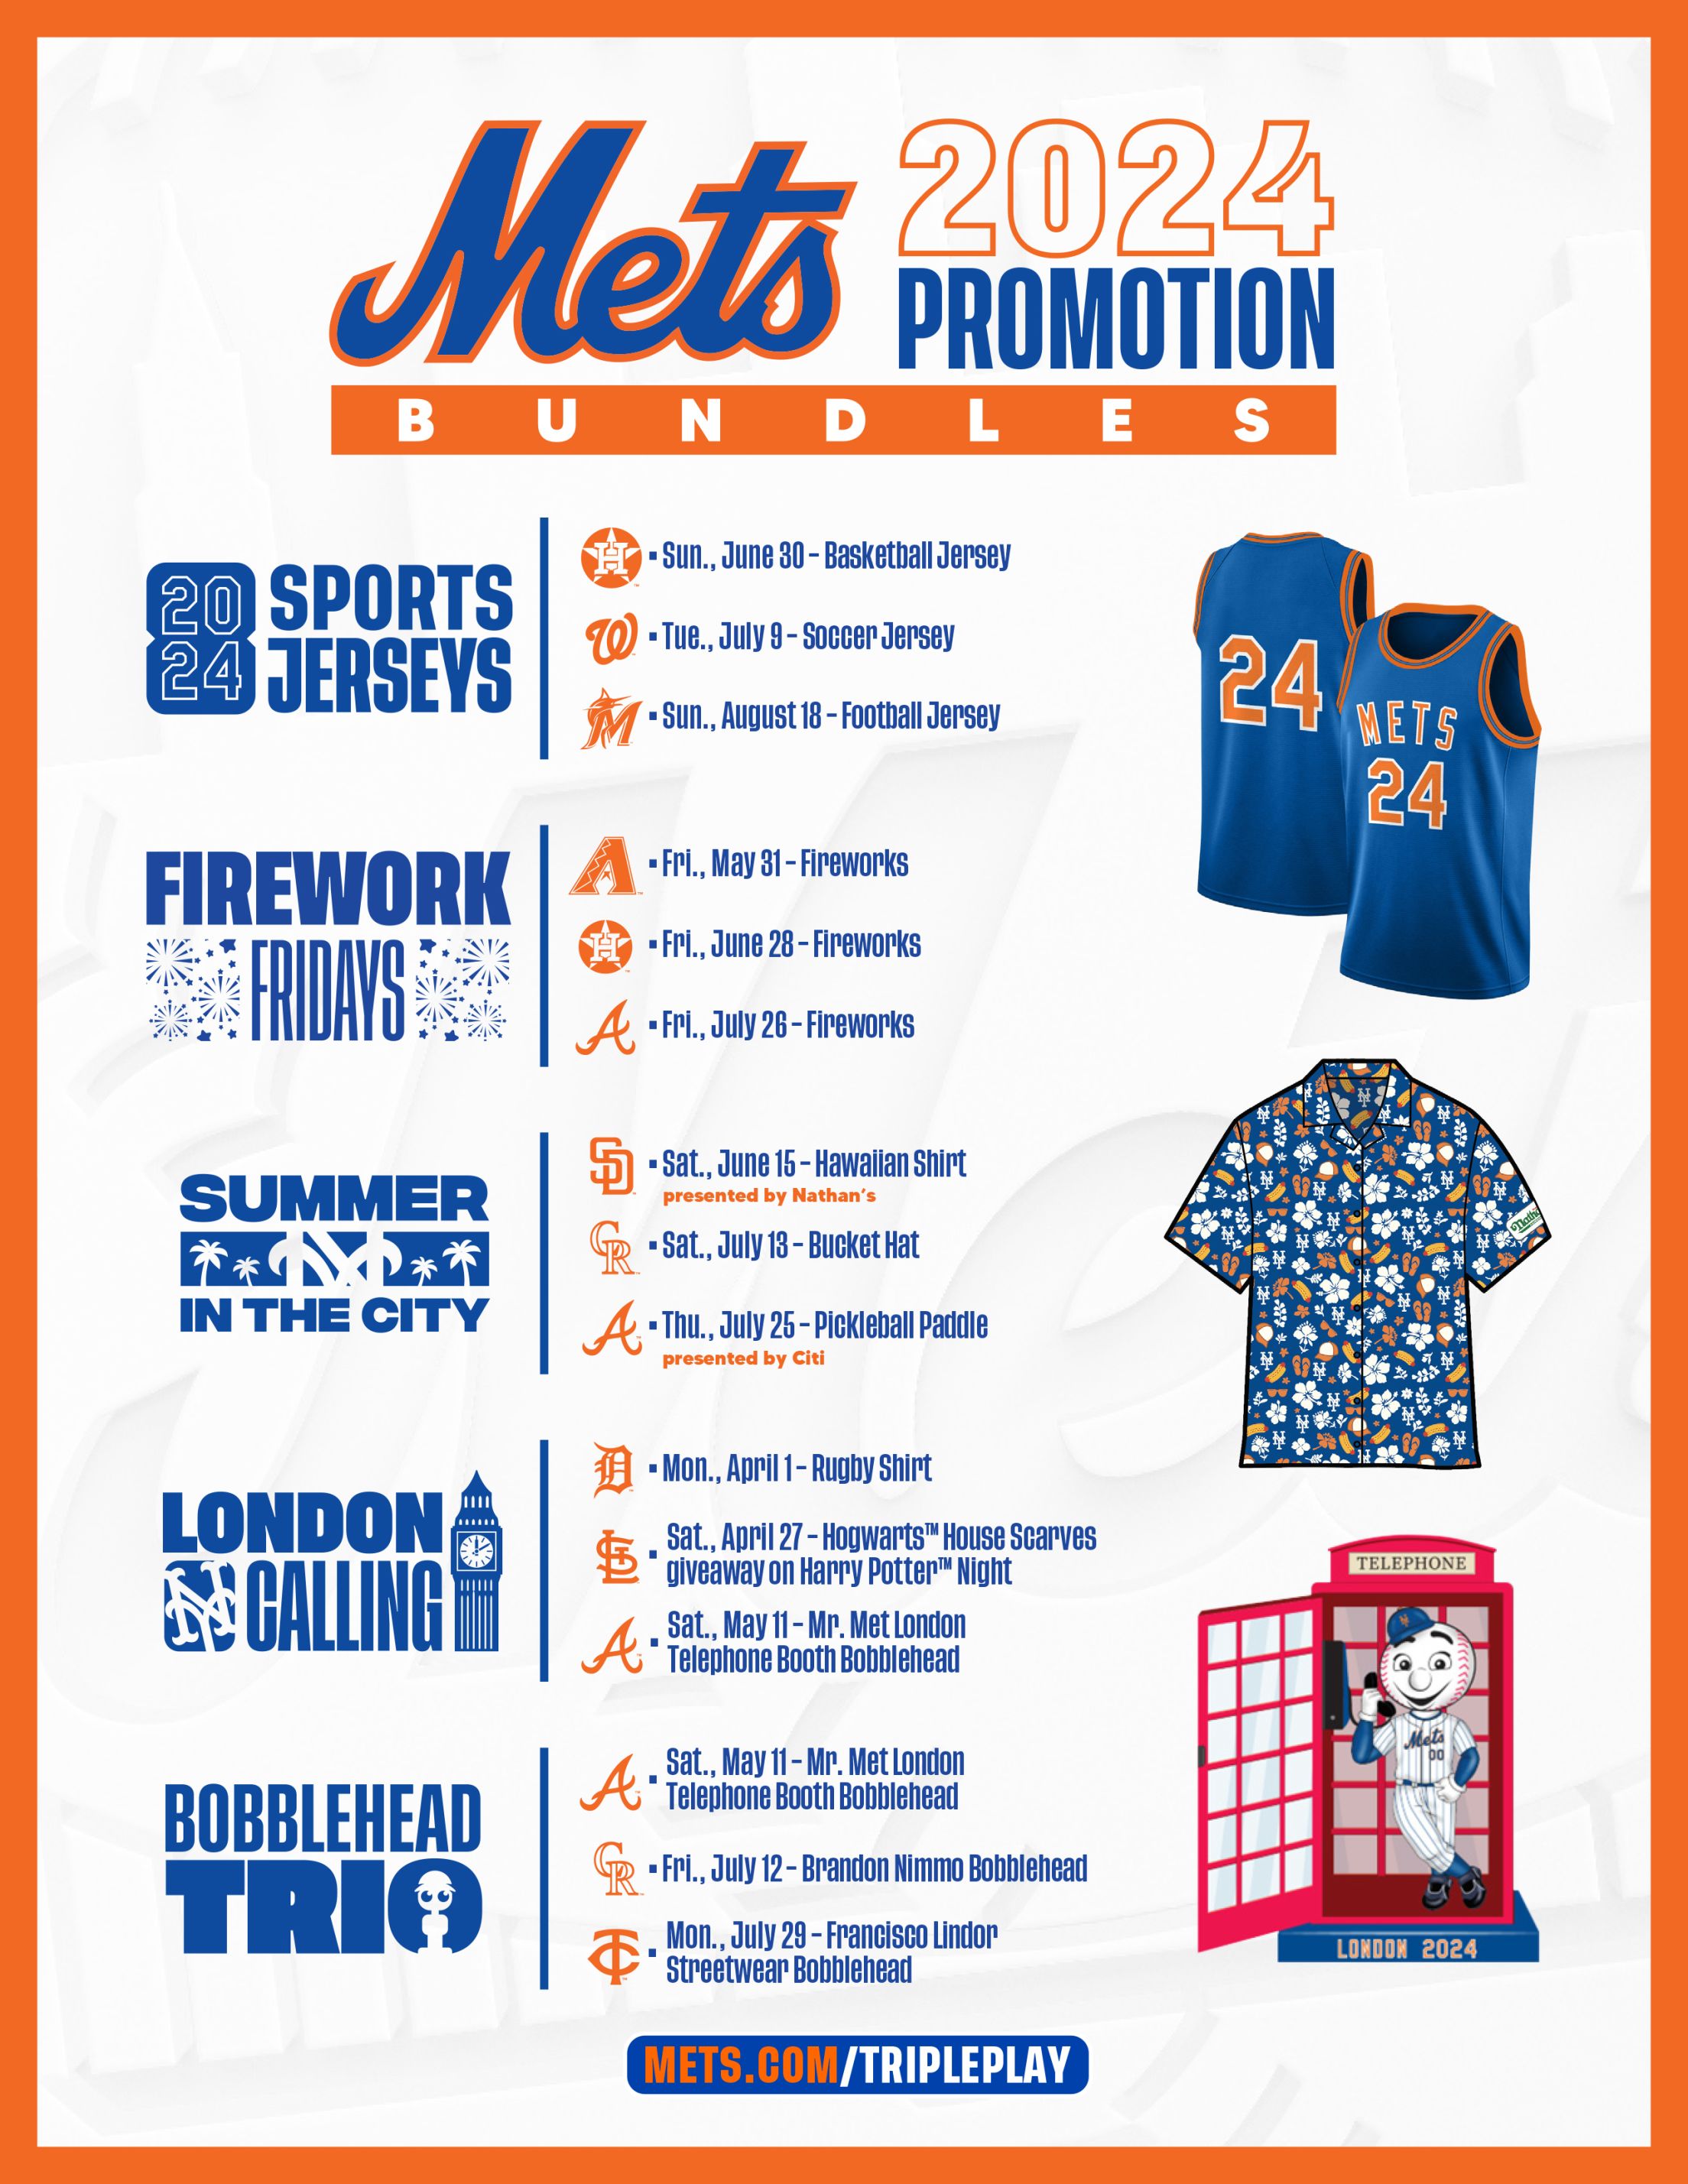 Promotional Giveaway Schedule